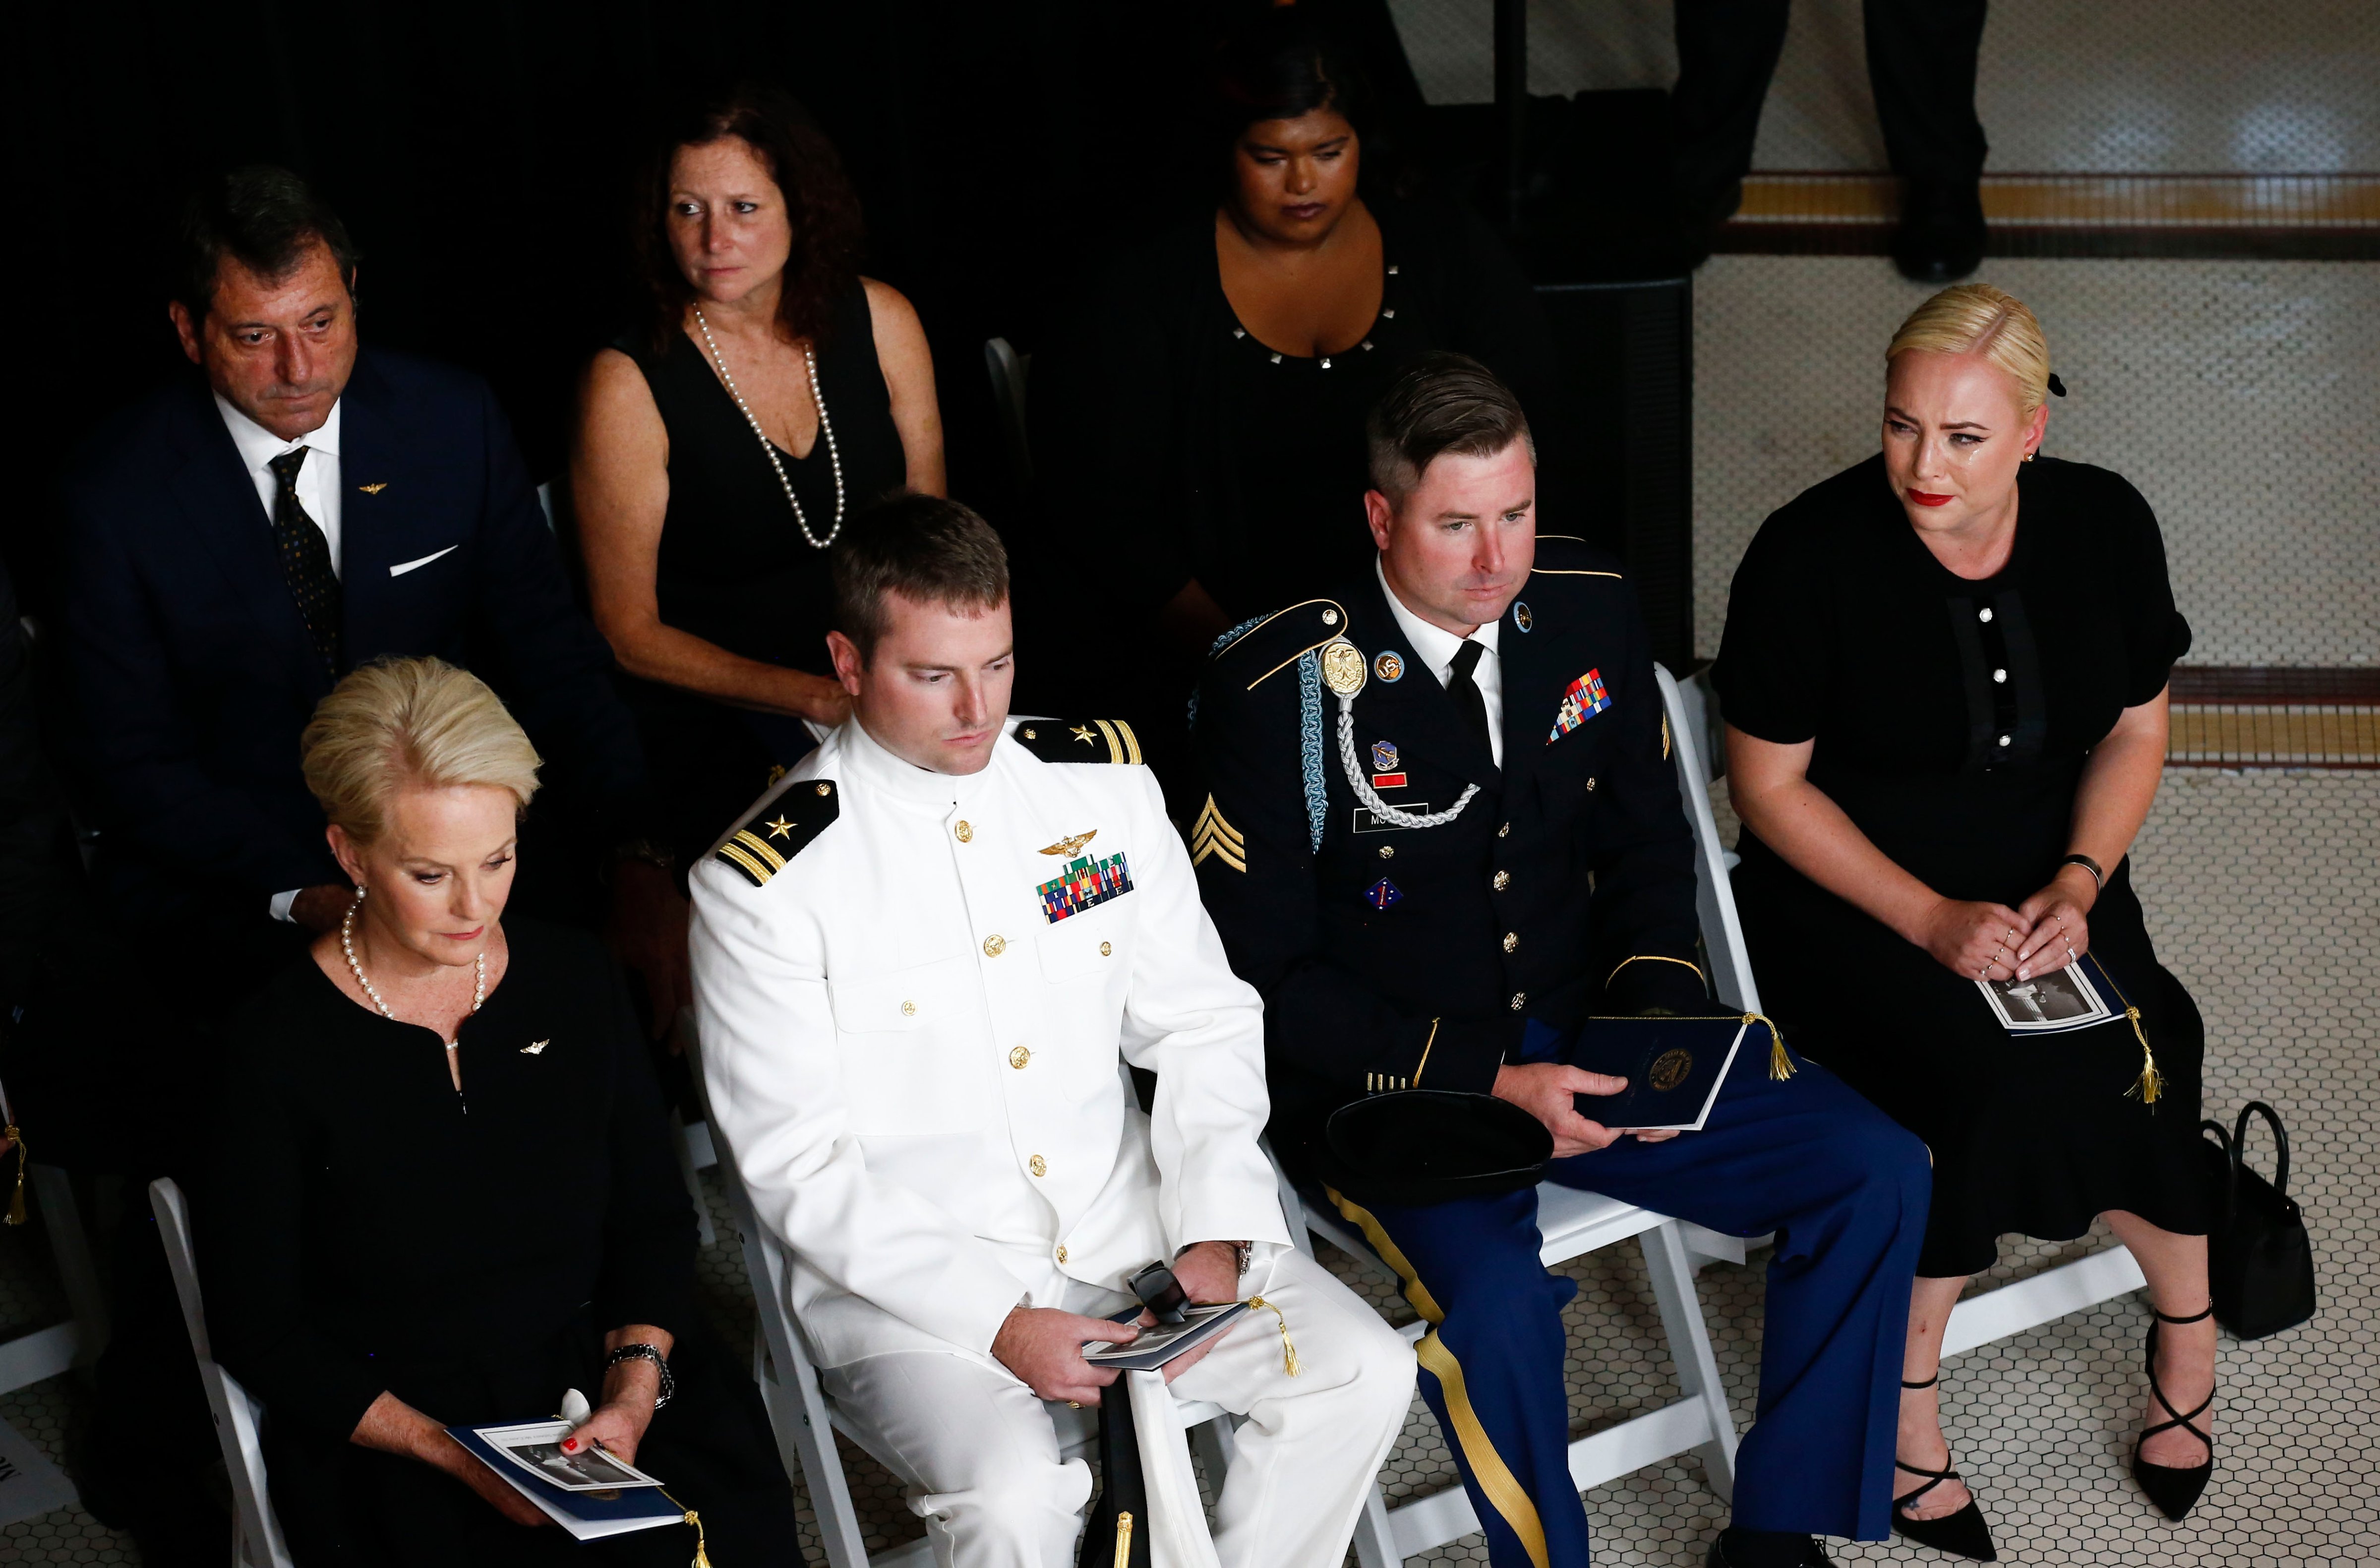 (L-R front) Cindy McCain, wife of US Senator John McCain, with her sons Jack, Jimmy, and daughter' Meghan and Bridget (R rear), attend the memorial service for Snator McCain at the Arizona Capitol on August 29, 2018, in Phoenix. (Ross D. Franklin - AFP/Getty Images)